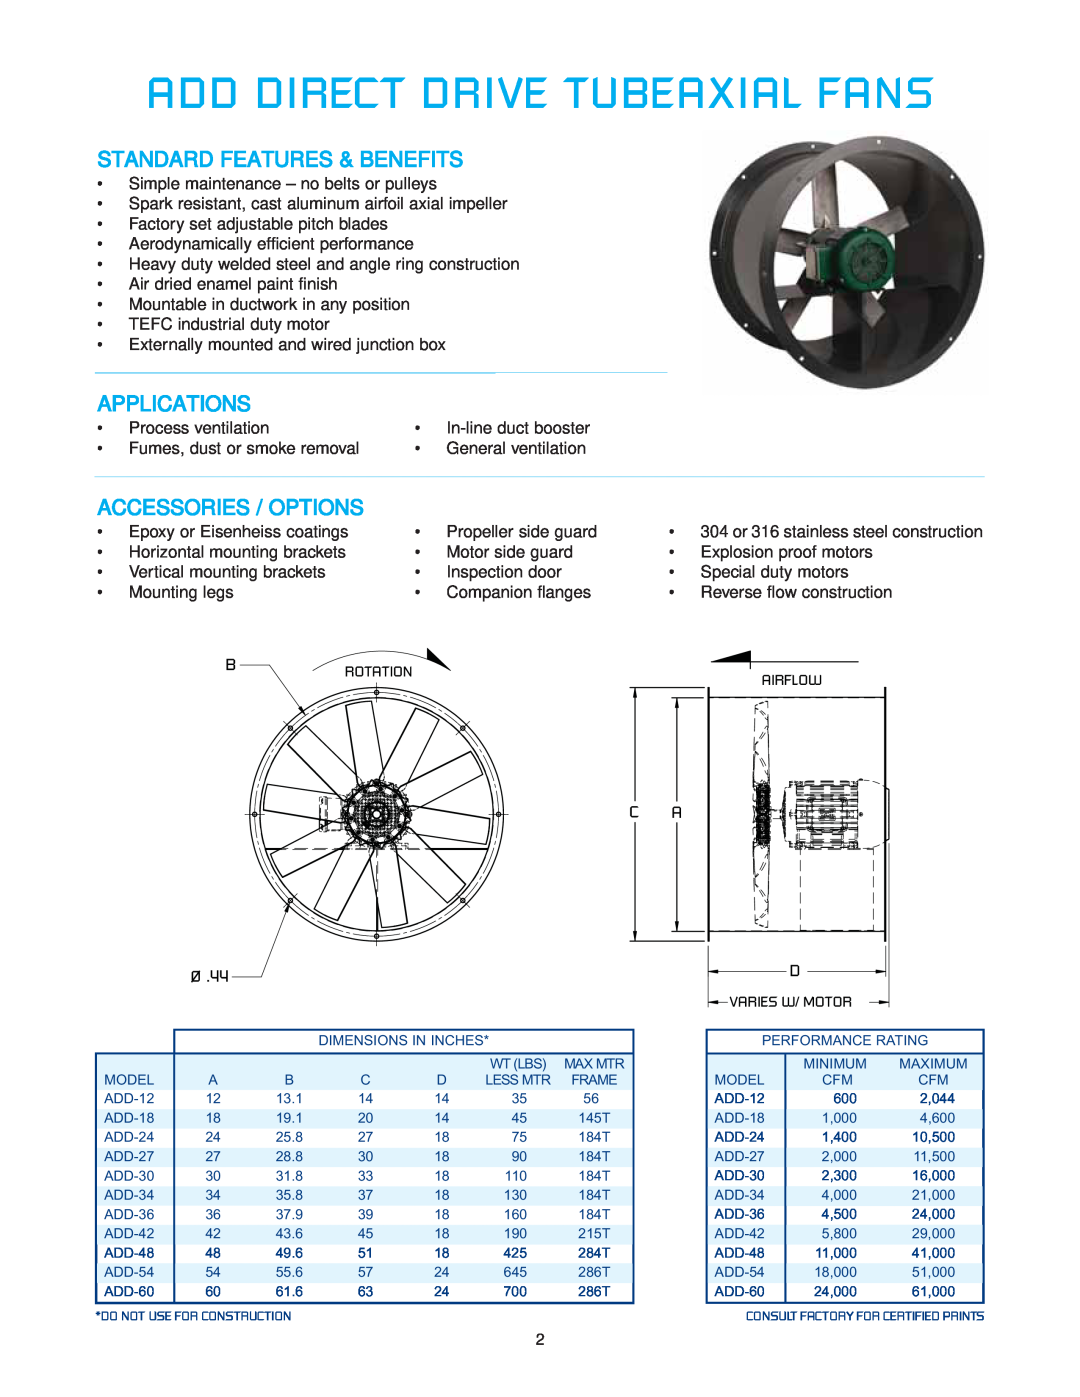 CFM ADD-48, ADD-30 manual Add Direct Drive Tubeaxial Fans, Standard Features & Benefits, Applications, Accessories / Options 